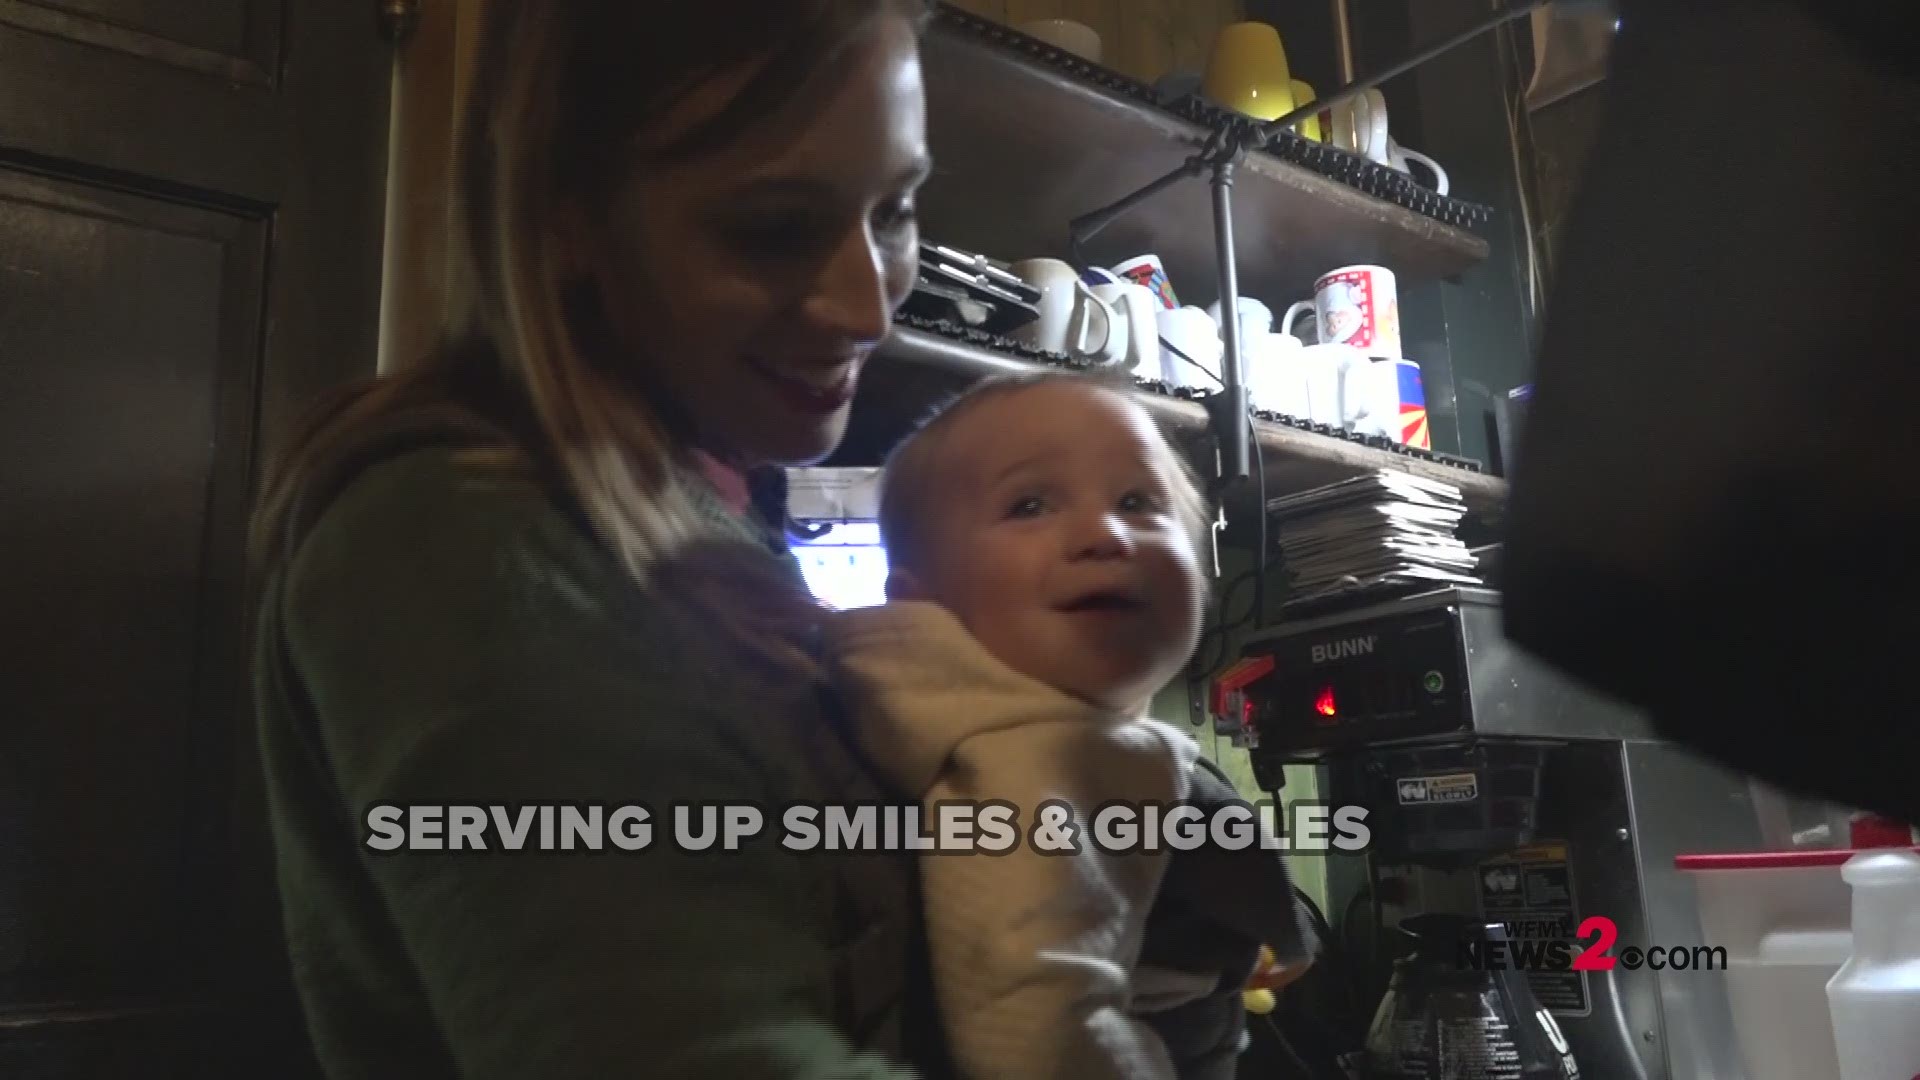 You could say baby Ellanore is stealing hearts in downtown Greensboro! Ellanore's mom had to bring her daughter to work at M'Coul's Public House in Greensboro due to the winter storm.